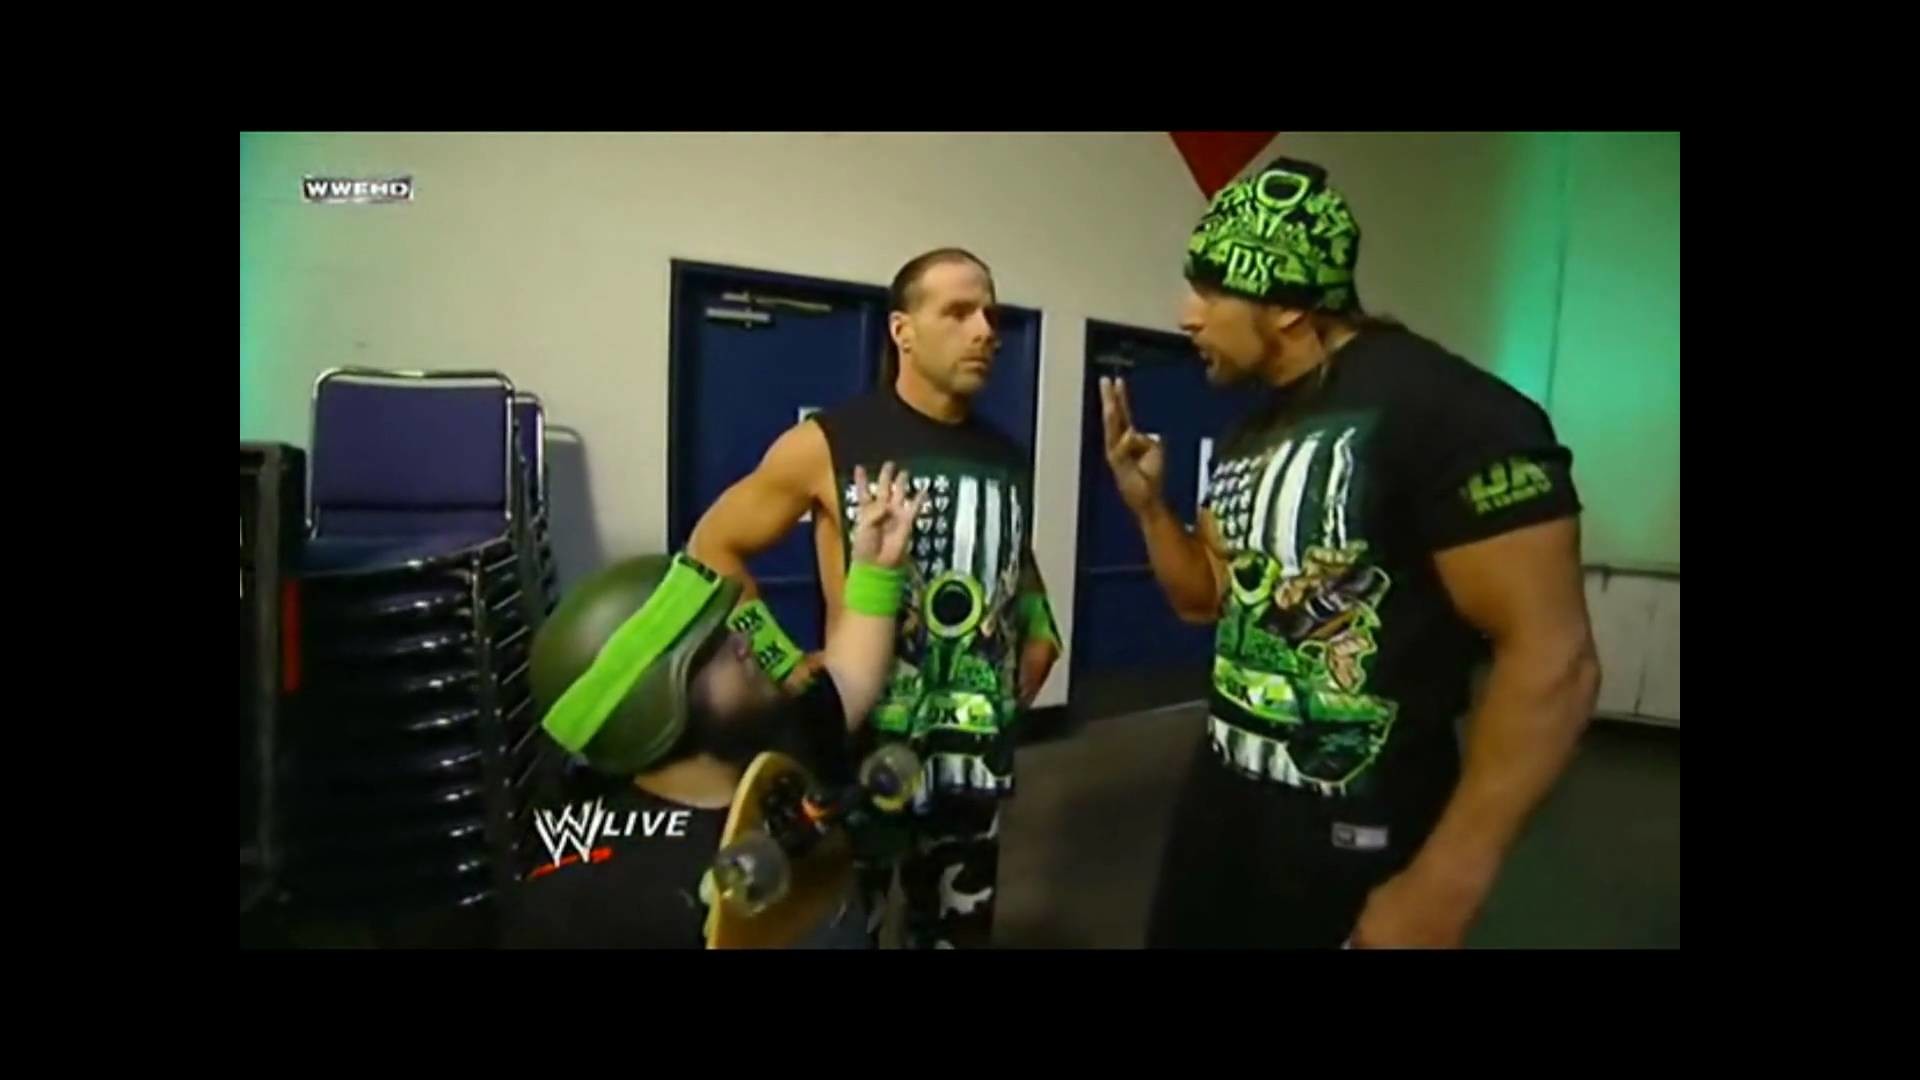 1920x1080 WWE Raw 12/28/09 DX and Hornswoggle attacks Julian [Backstage]